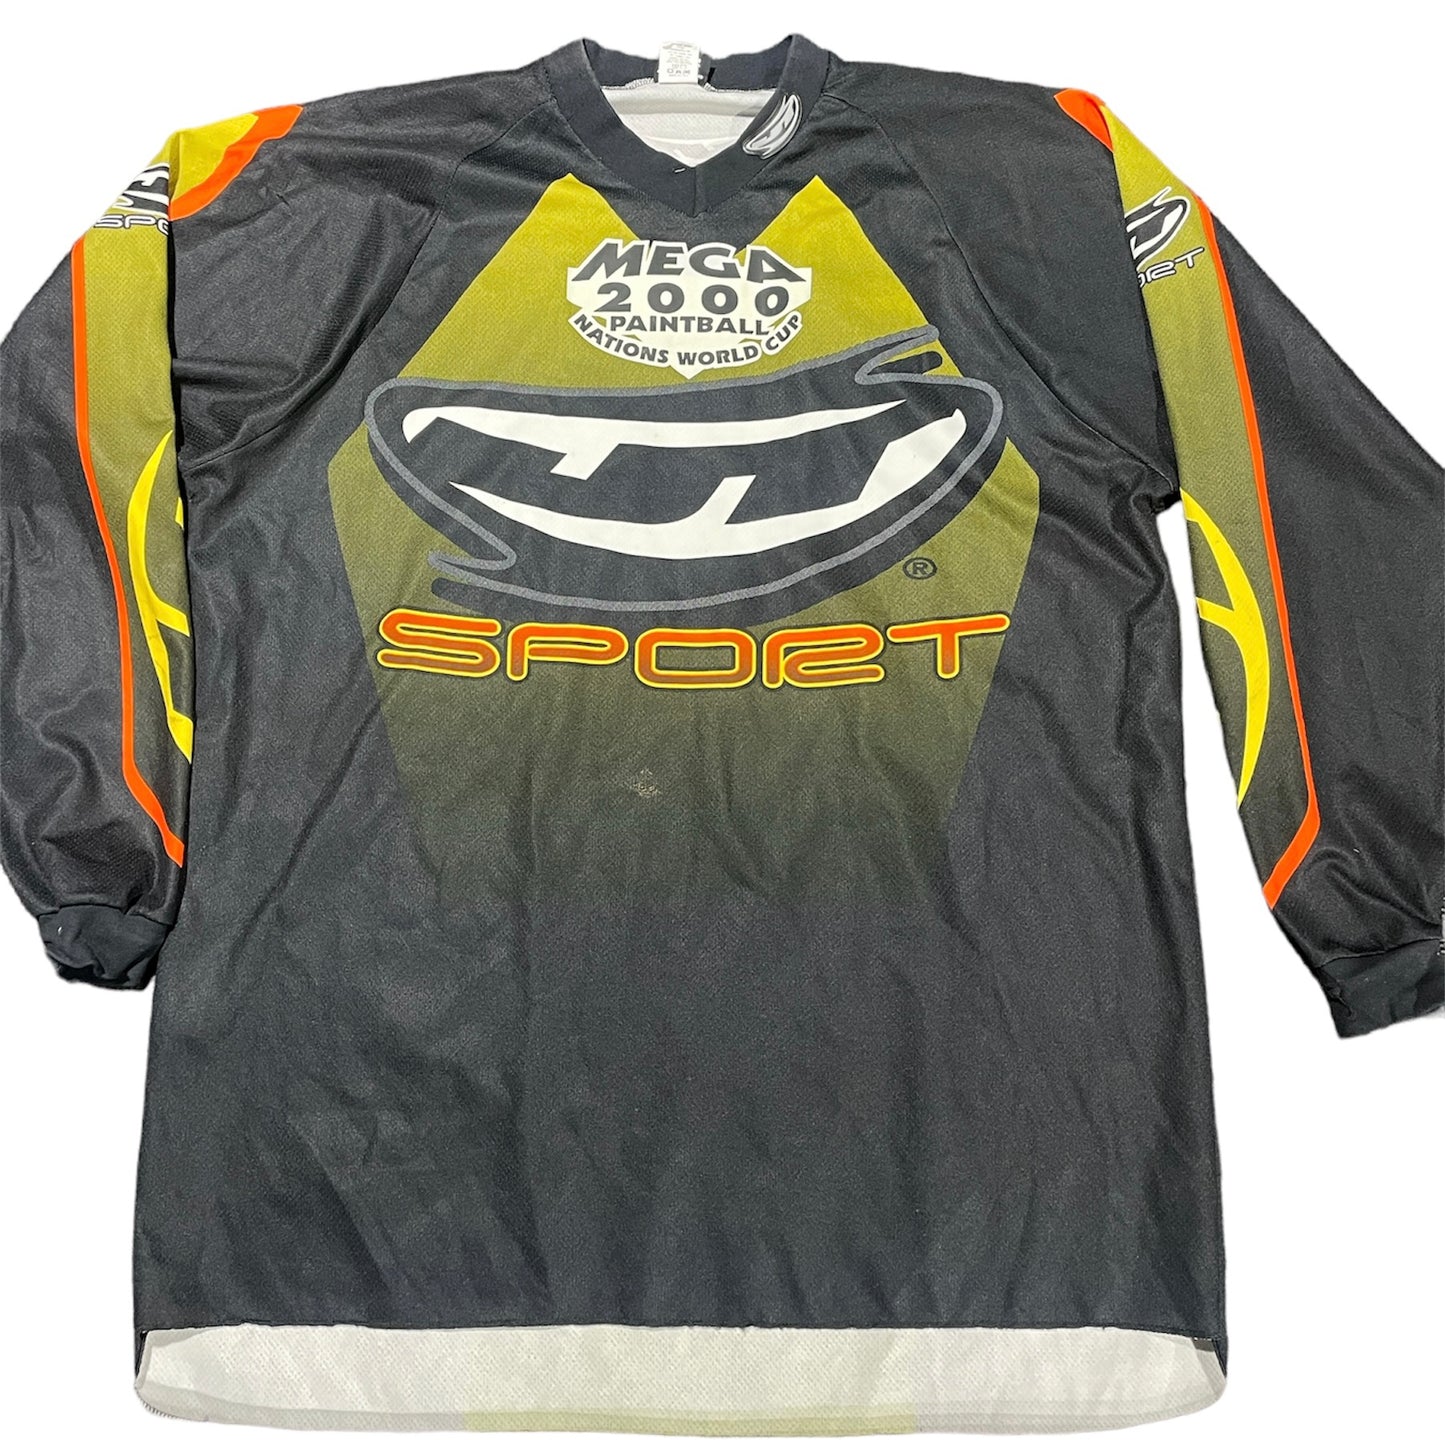 Steve Rabackoff USA Nations Cup Paintball team jersey